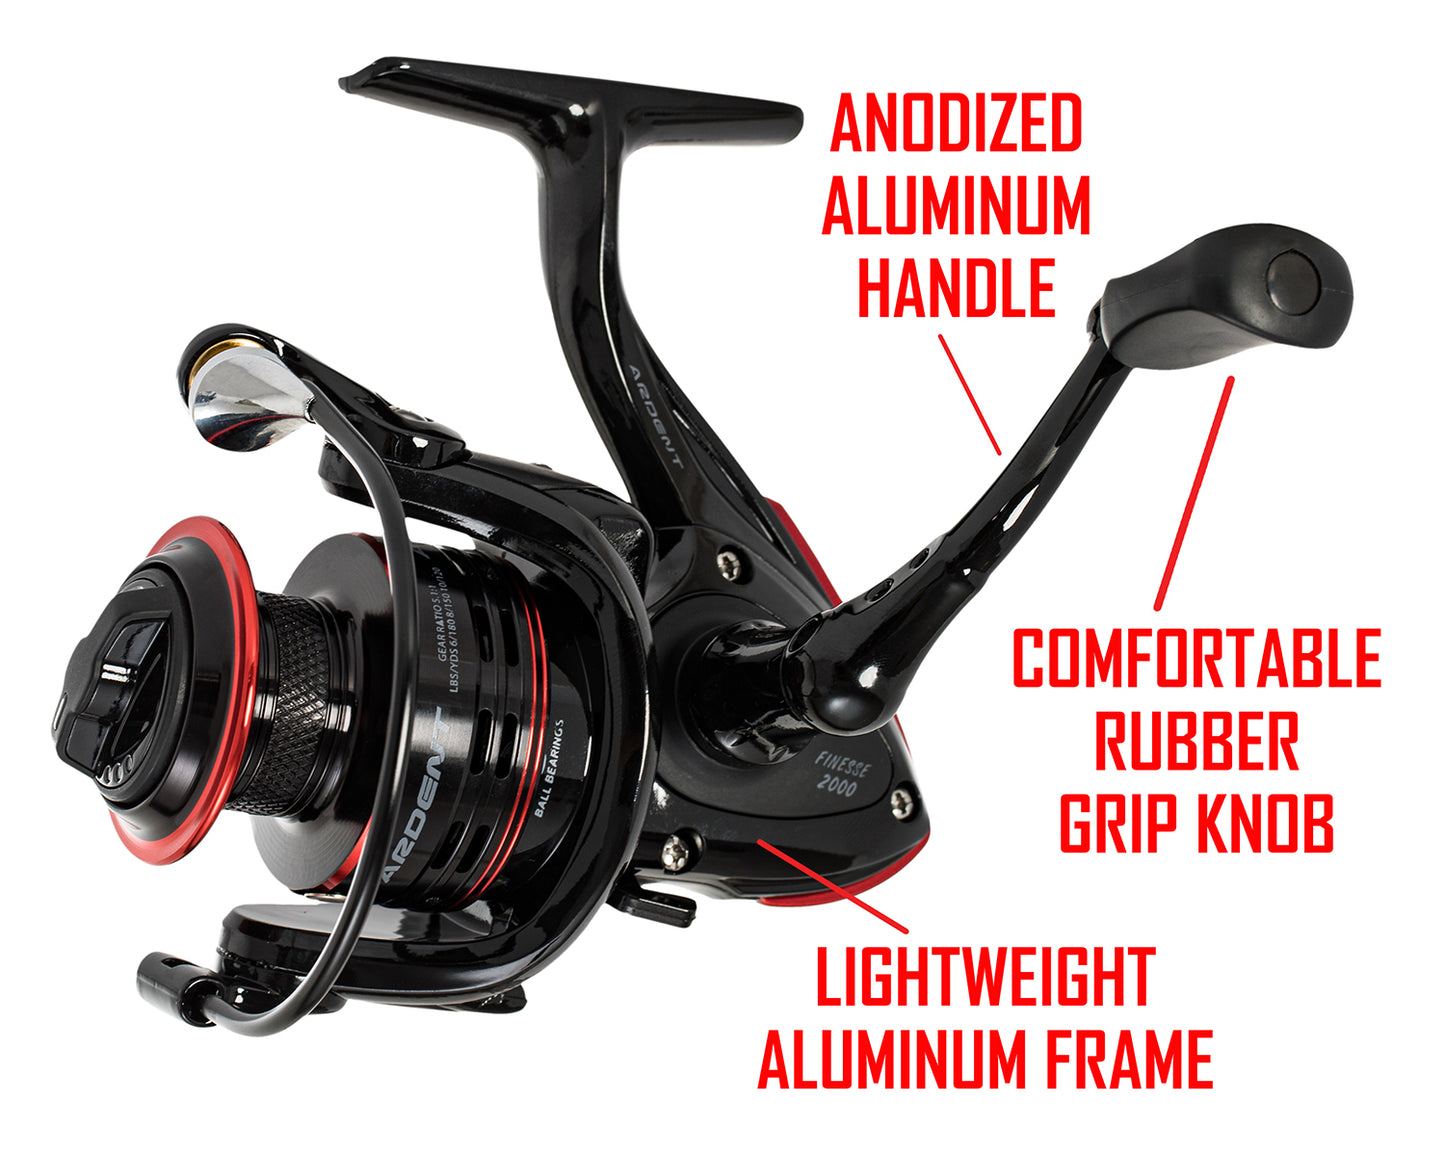 a black and red fishing reel (FINESSE SPINNING REEL). RED text in image: ANODIZED ALUMINUM HANDLE COMFORTABLE RUBBER GRIP KNOB LIGHTWEIGHT ALUMINUM FRAME